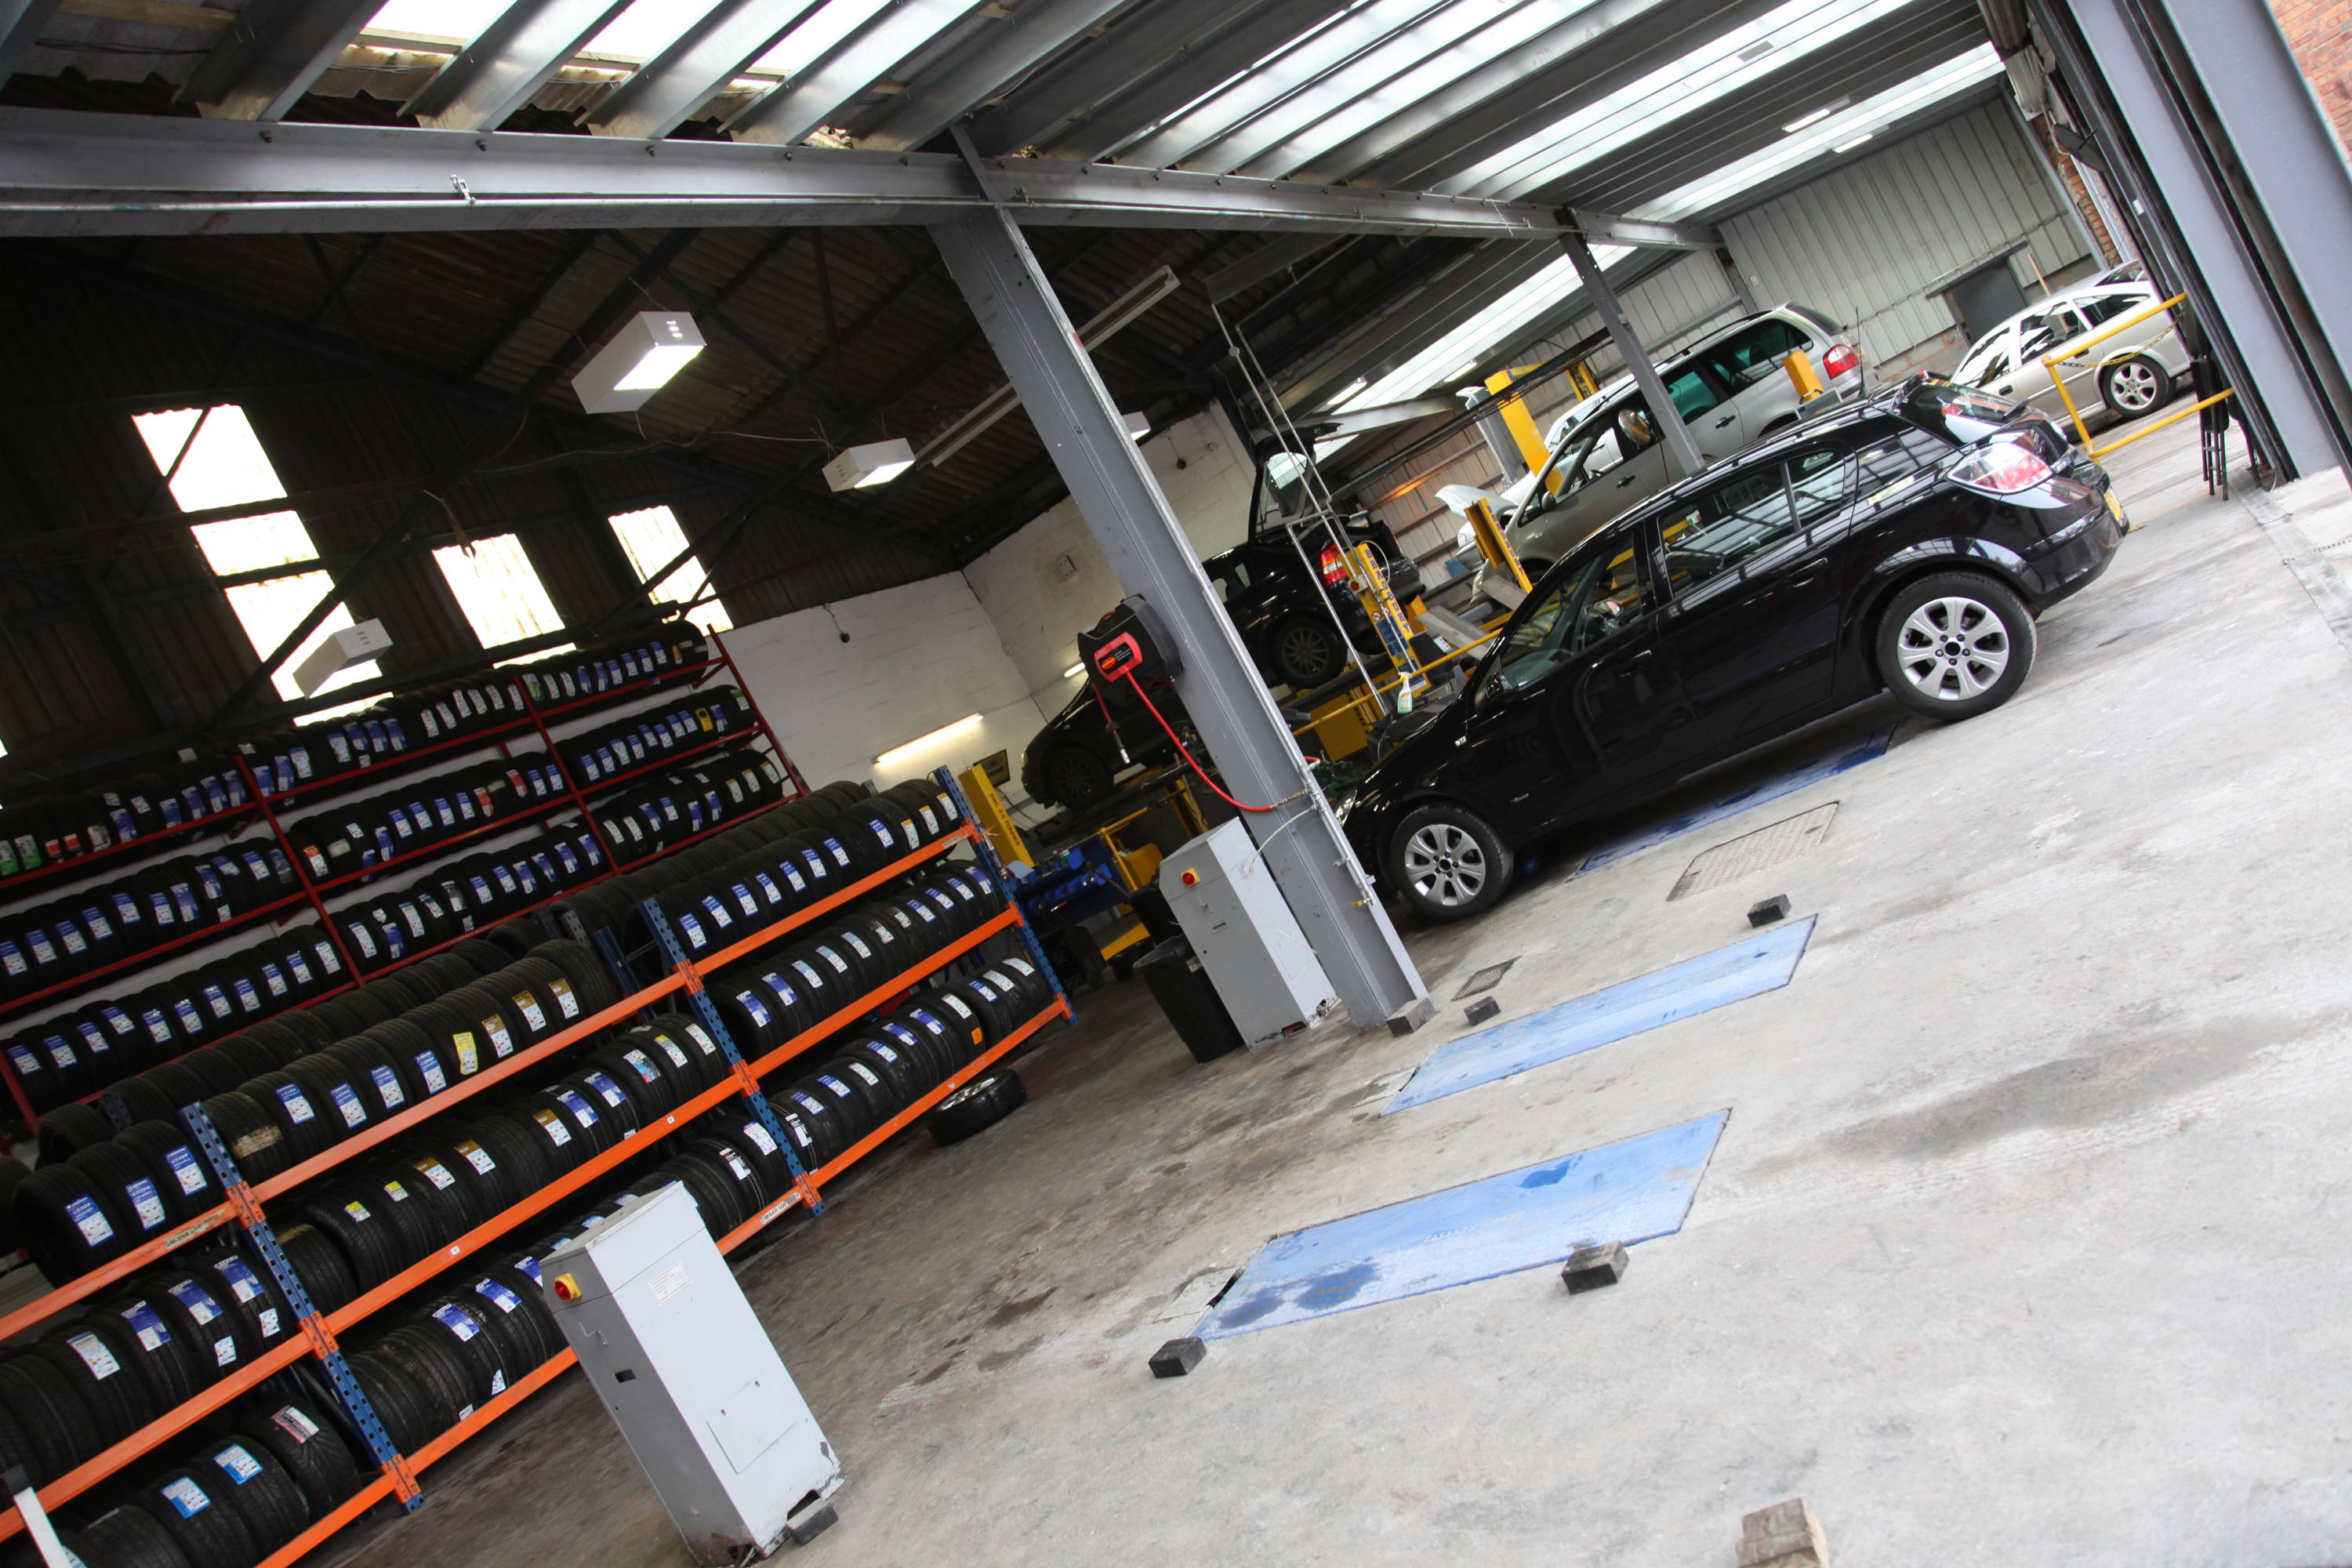 Inside Wednesbury car garage with rows of tyres and car parked 